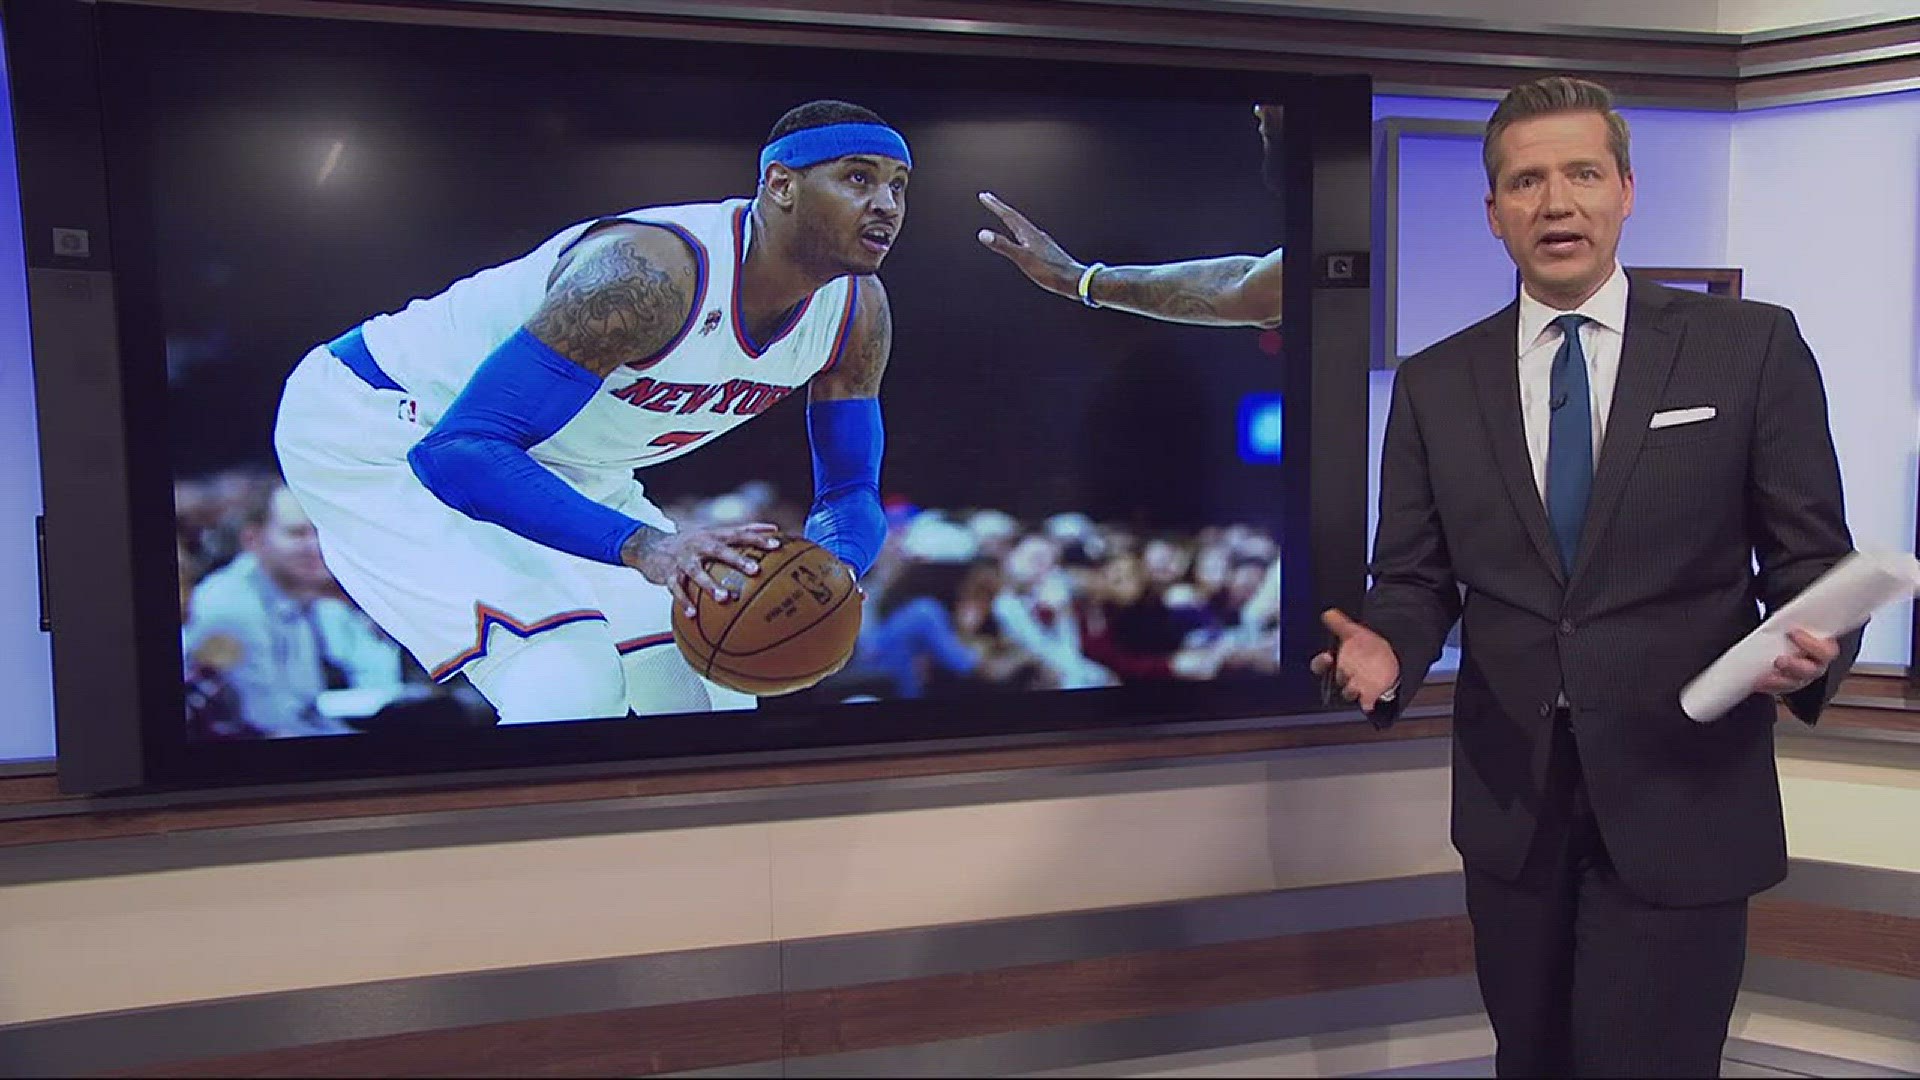 Is 10-time All-Star Carmelo Anthony a good fit for the Houston Rockets? KHOU 11 Sports' Jason Bristol takes a look.